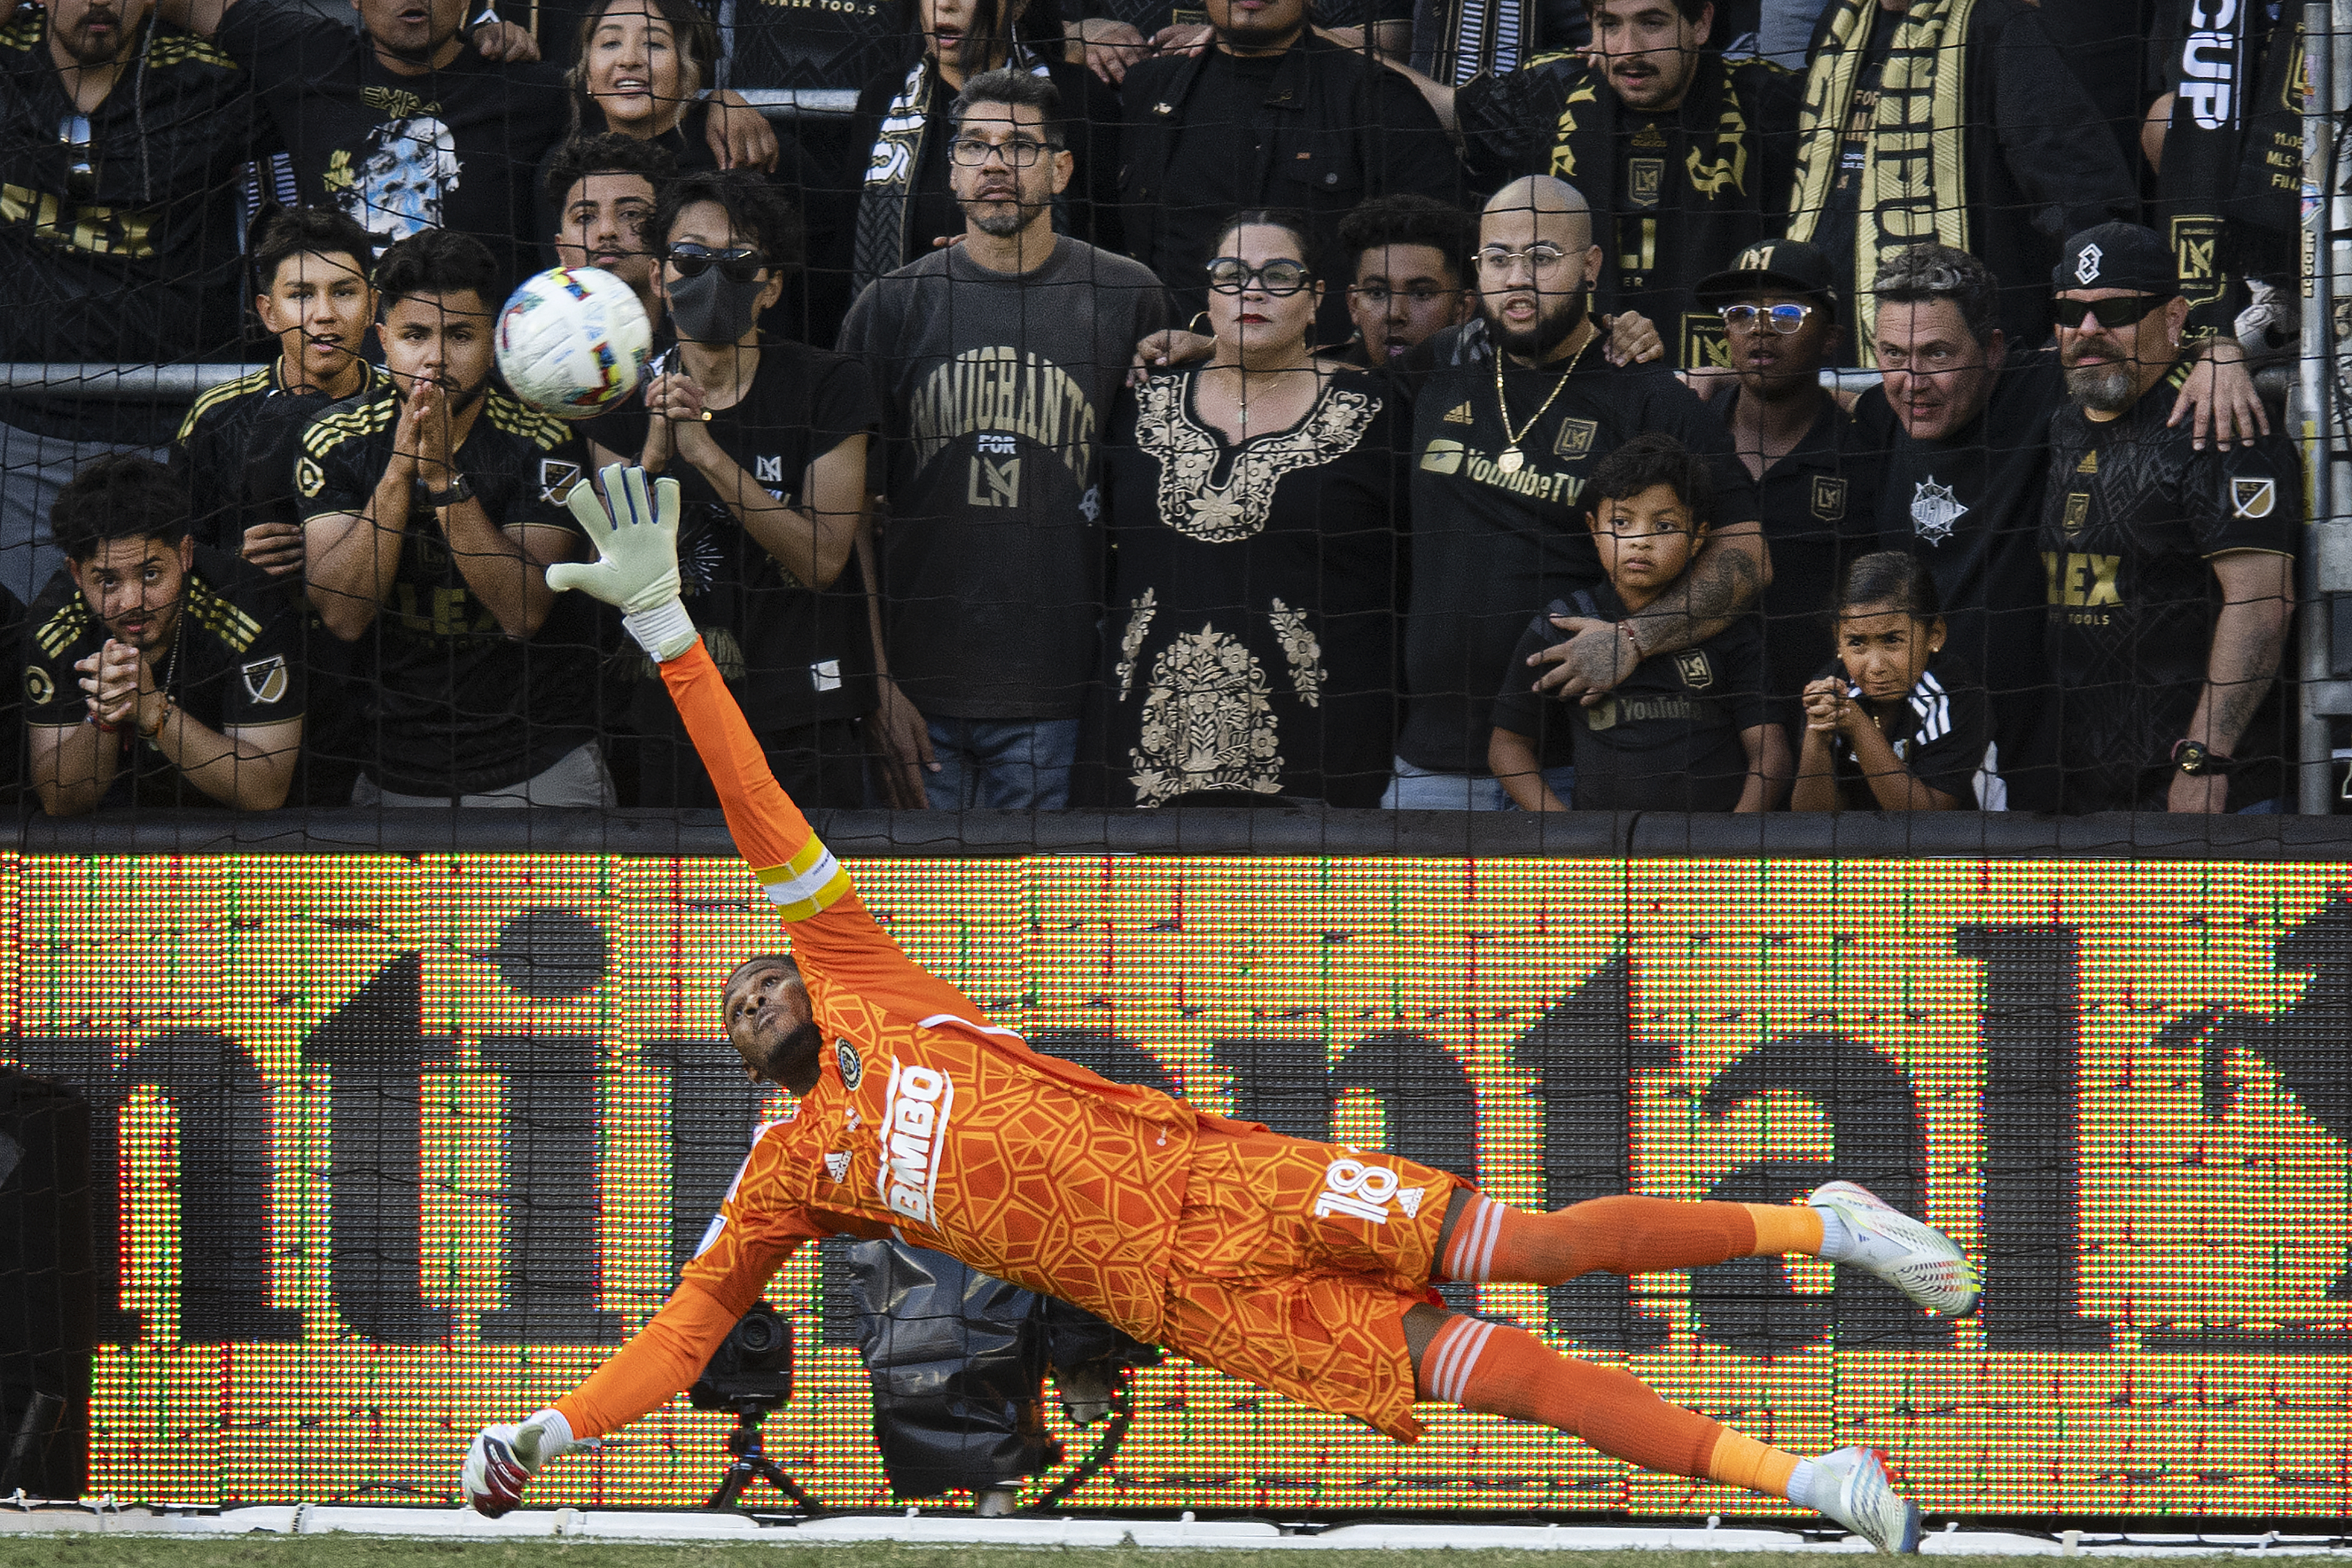 Union see season end in penalty kicks to LAFC at 2022 MLS Cup